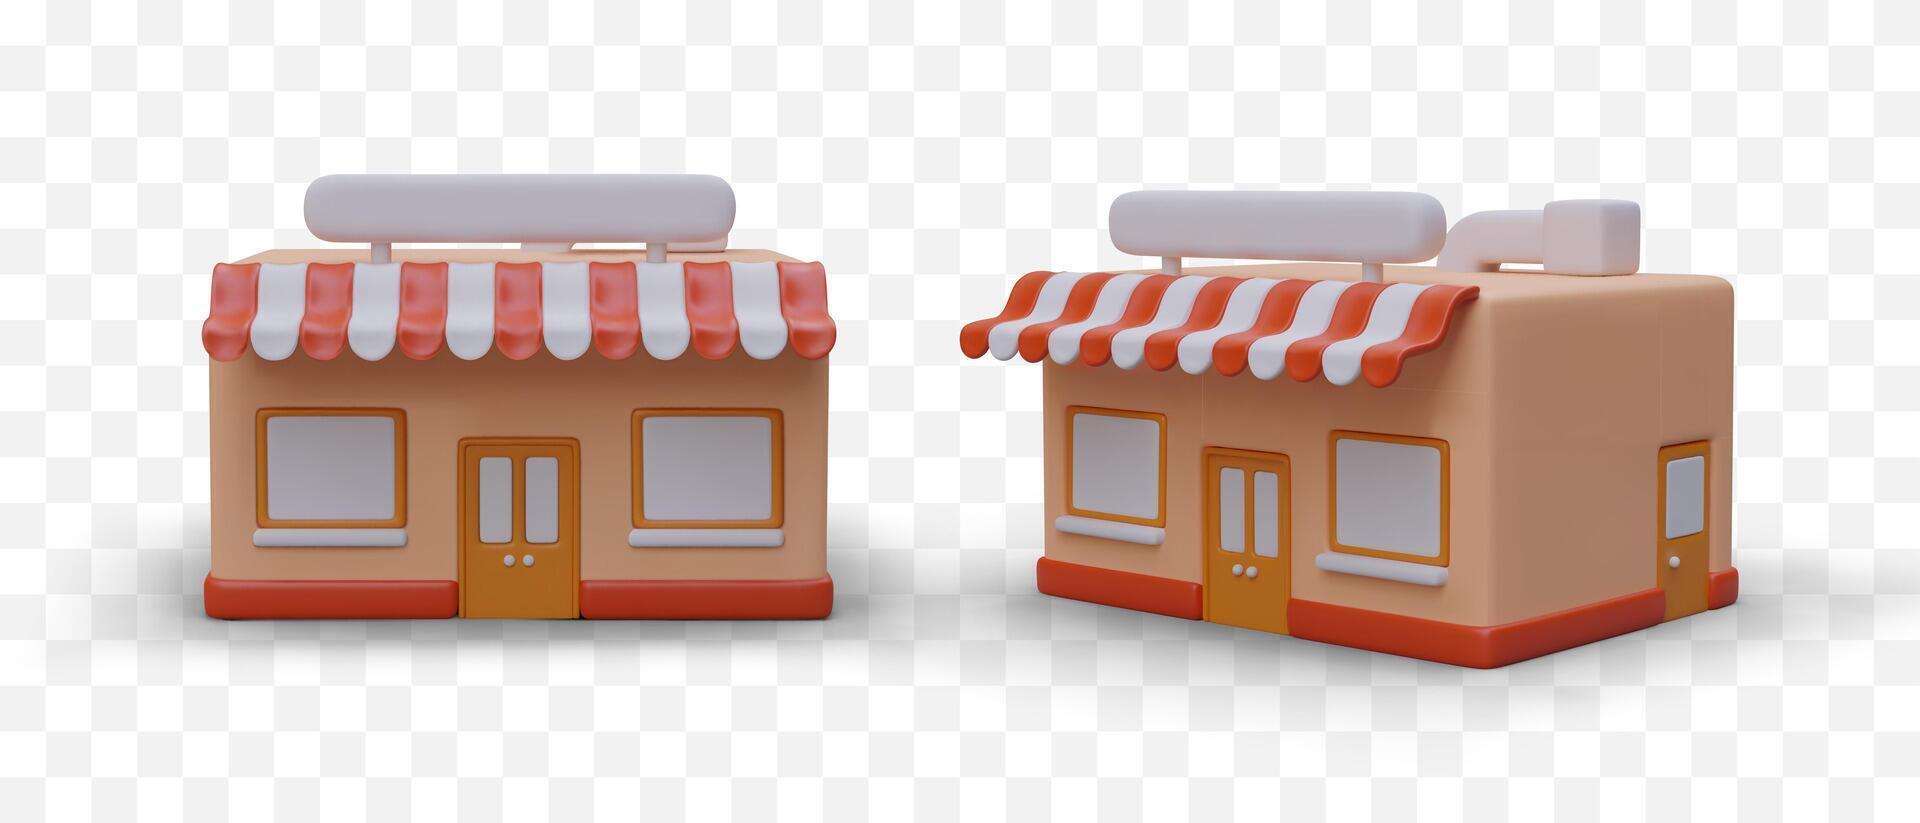 3D shop buildings with bright striped canopies. Two images from different angles vector